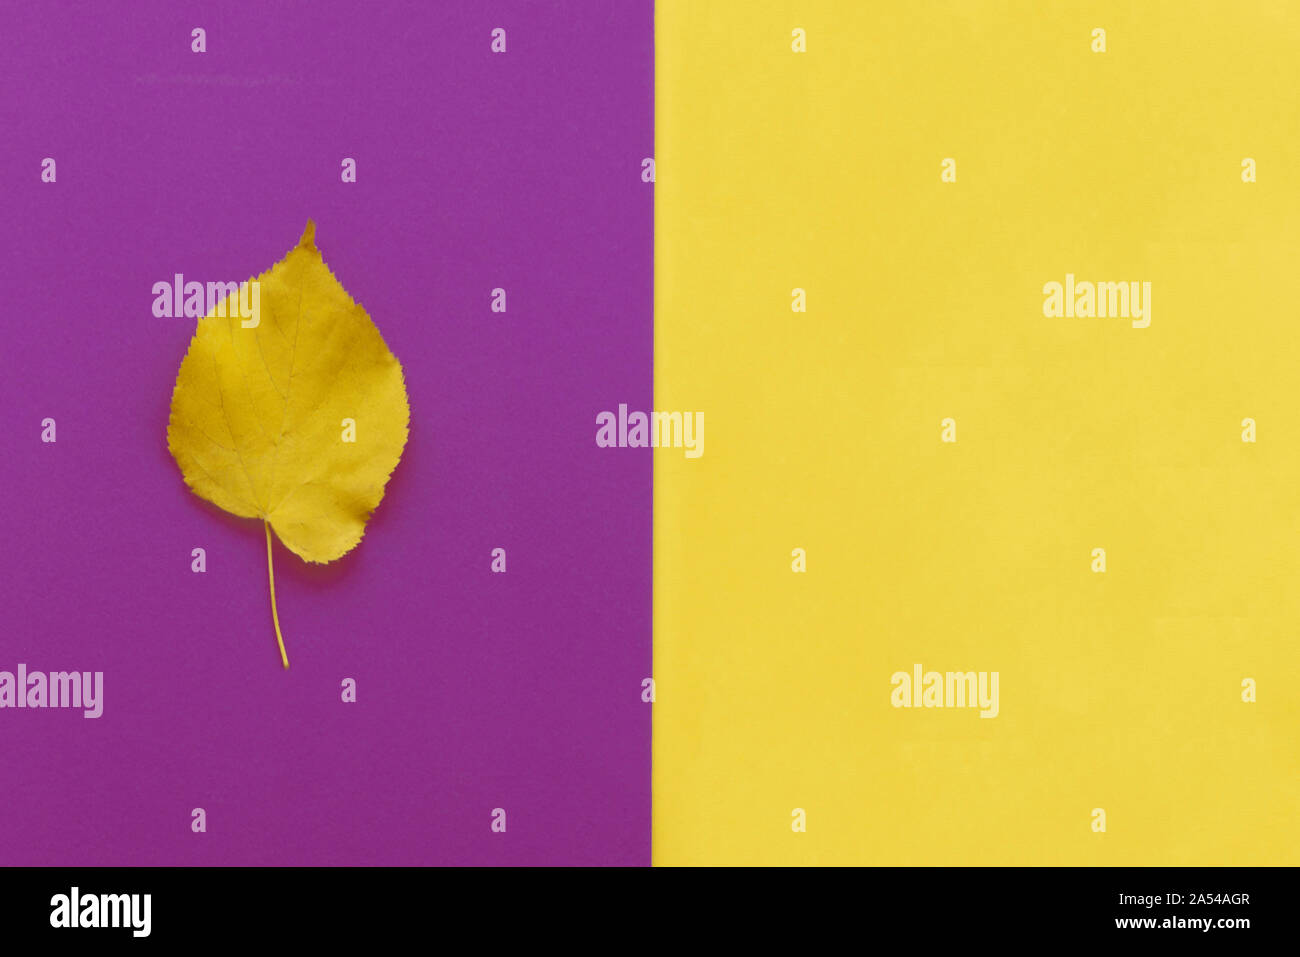 Autumn leaf flat lay composition. Yellow leaf on colorful paper background. Autumn concept. Fall leaves design. Top view, copy space Stock Photo